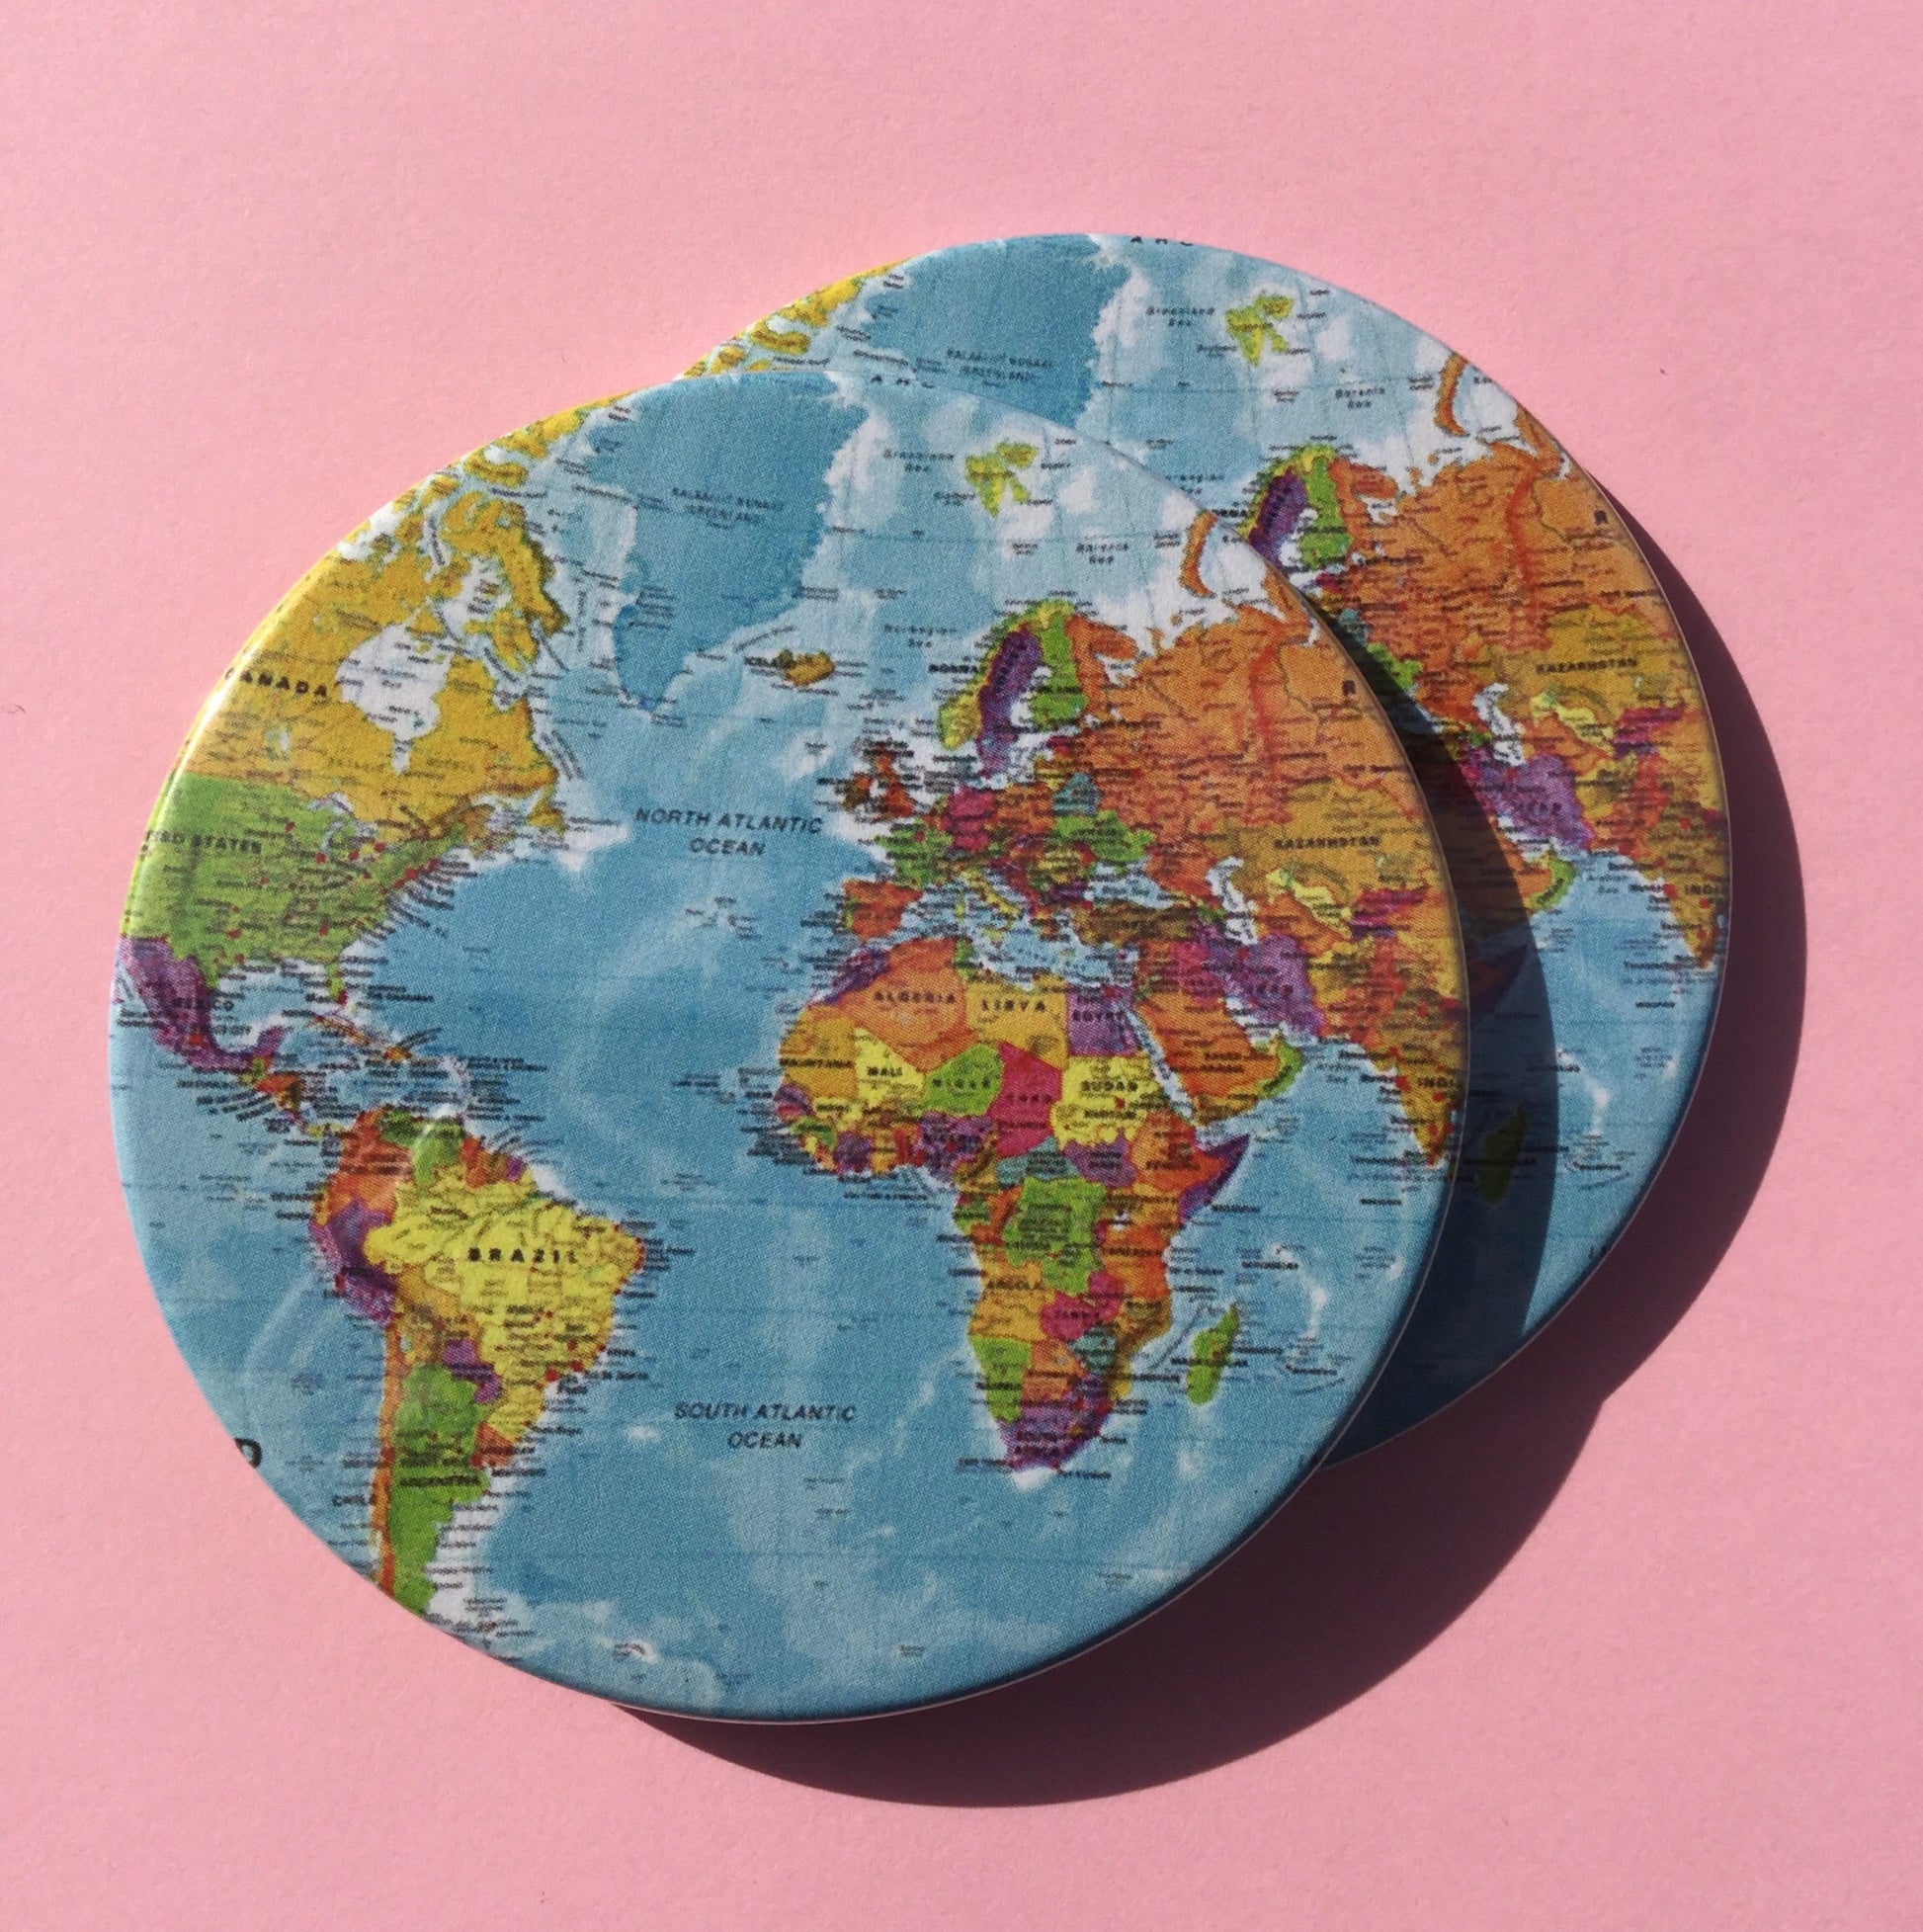 World map coaster set / World map drink coasters - Radical Buttons